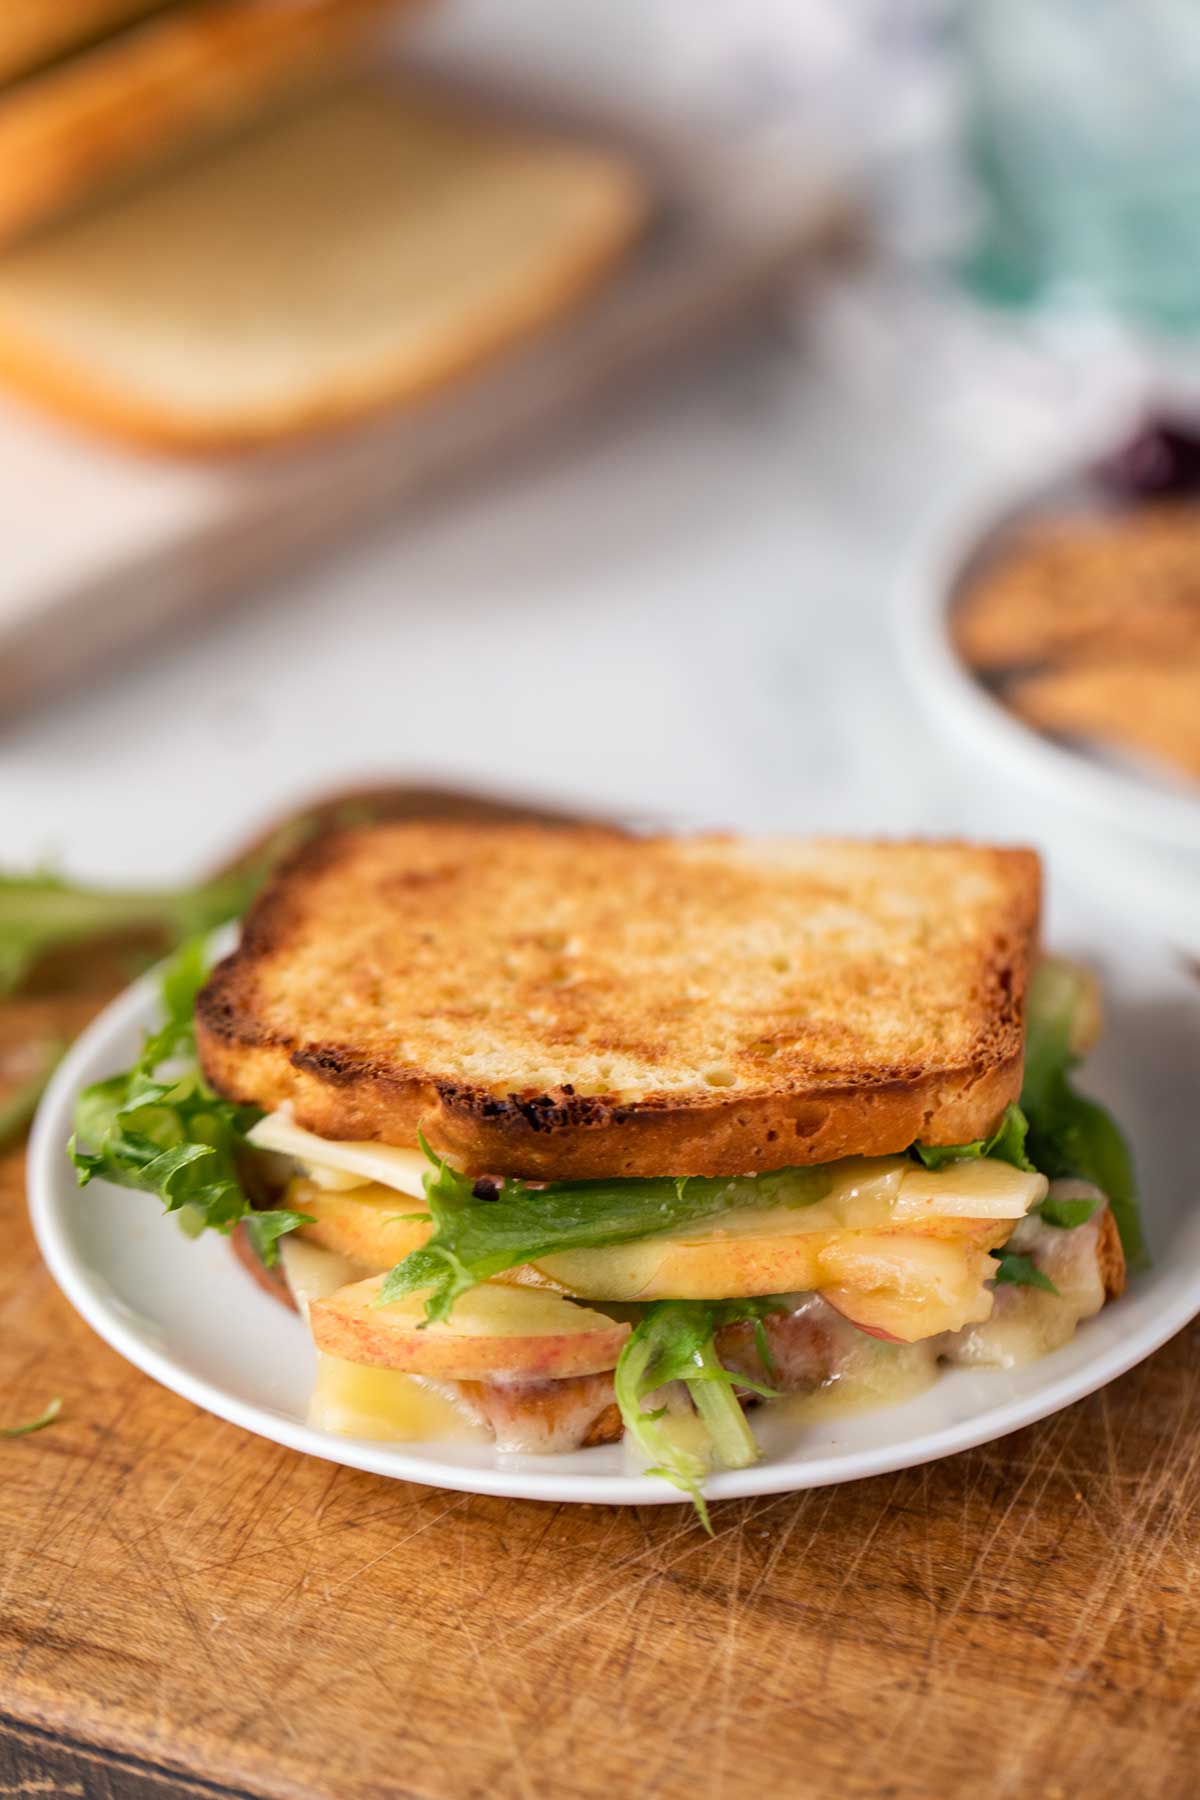 A grilled cheese made with gluten-free bread and garnished with slices of apples and greens